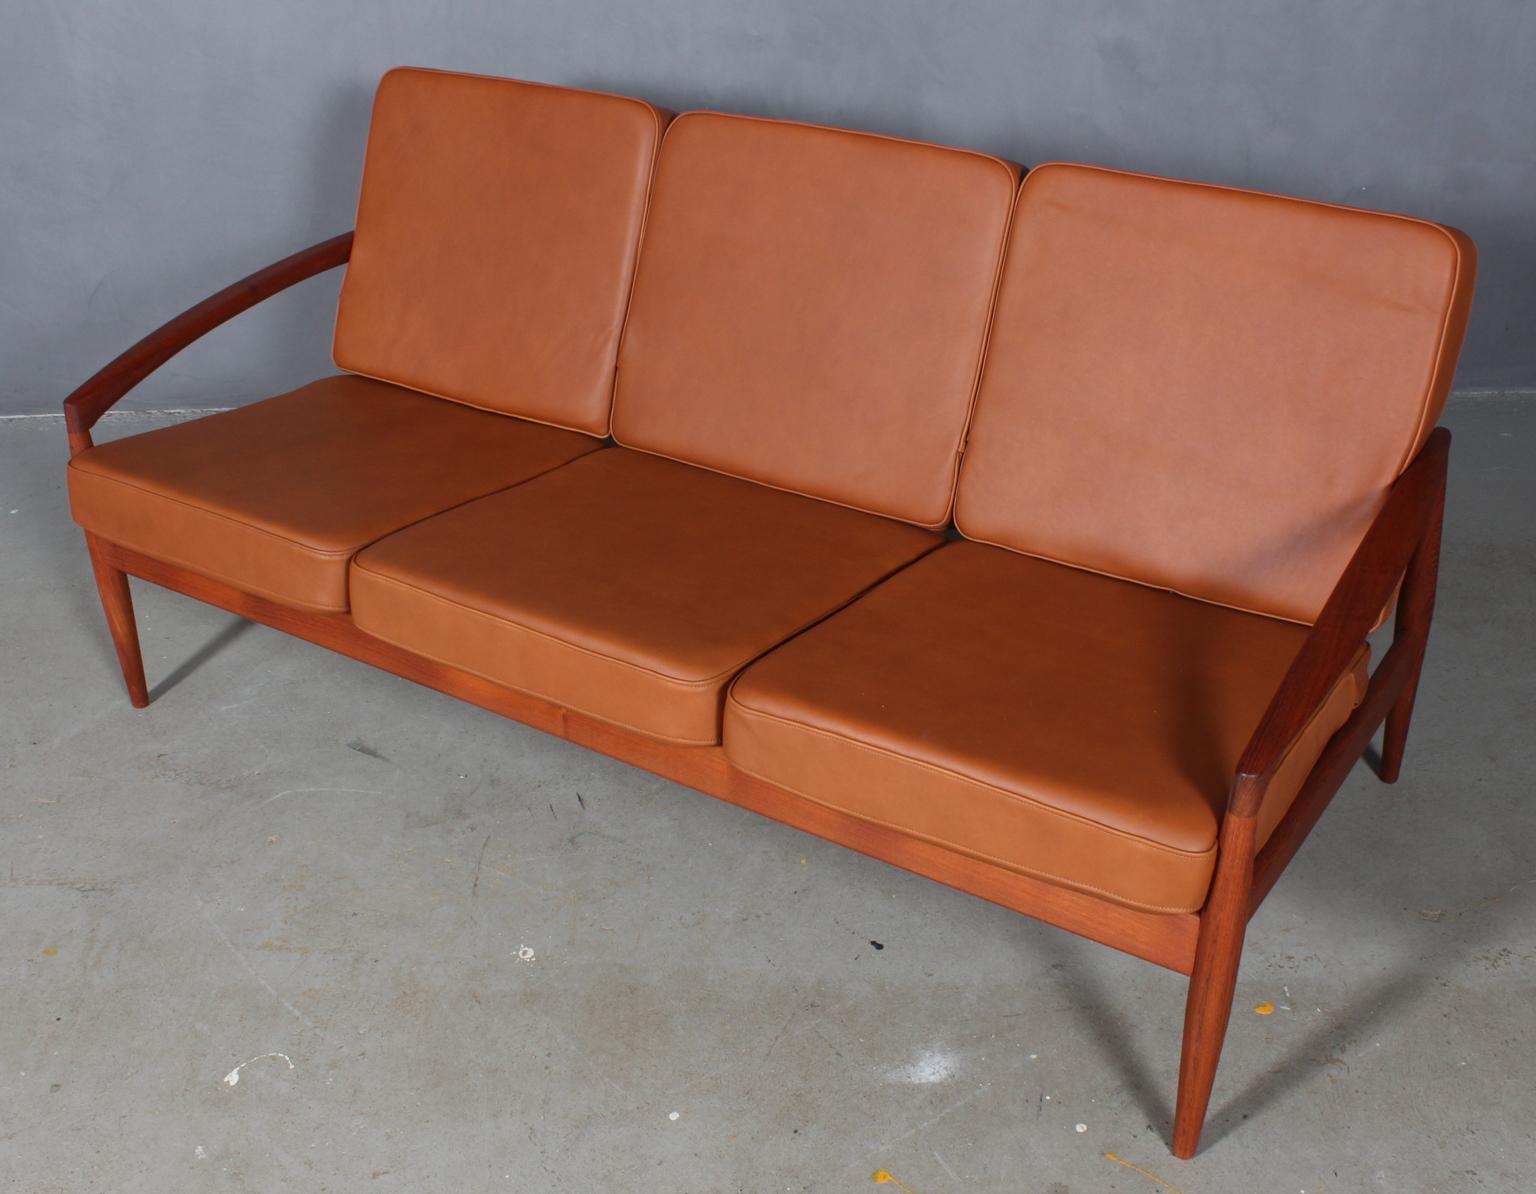 Kai Kristiansen three-seat sofa with frame of teak and organic armrests.

New upholstered with walnut elegance aniline leather.

Model paperknife, made by Magnus Olsen.